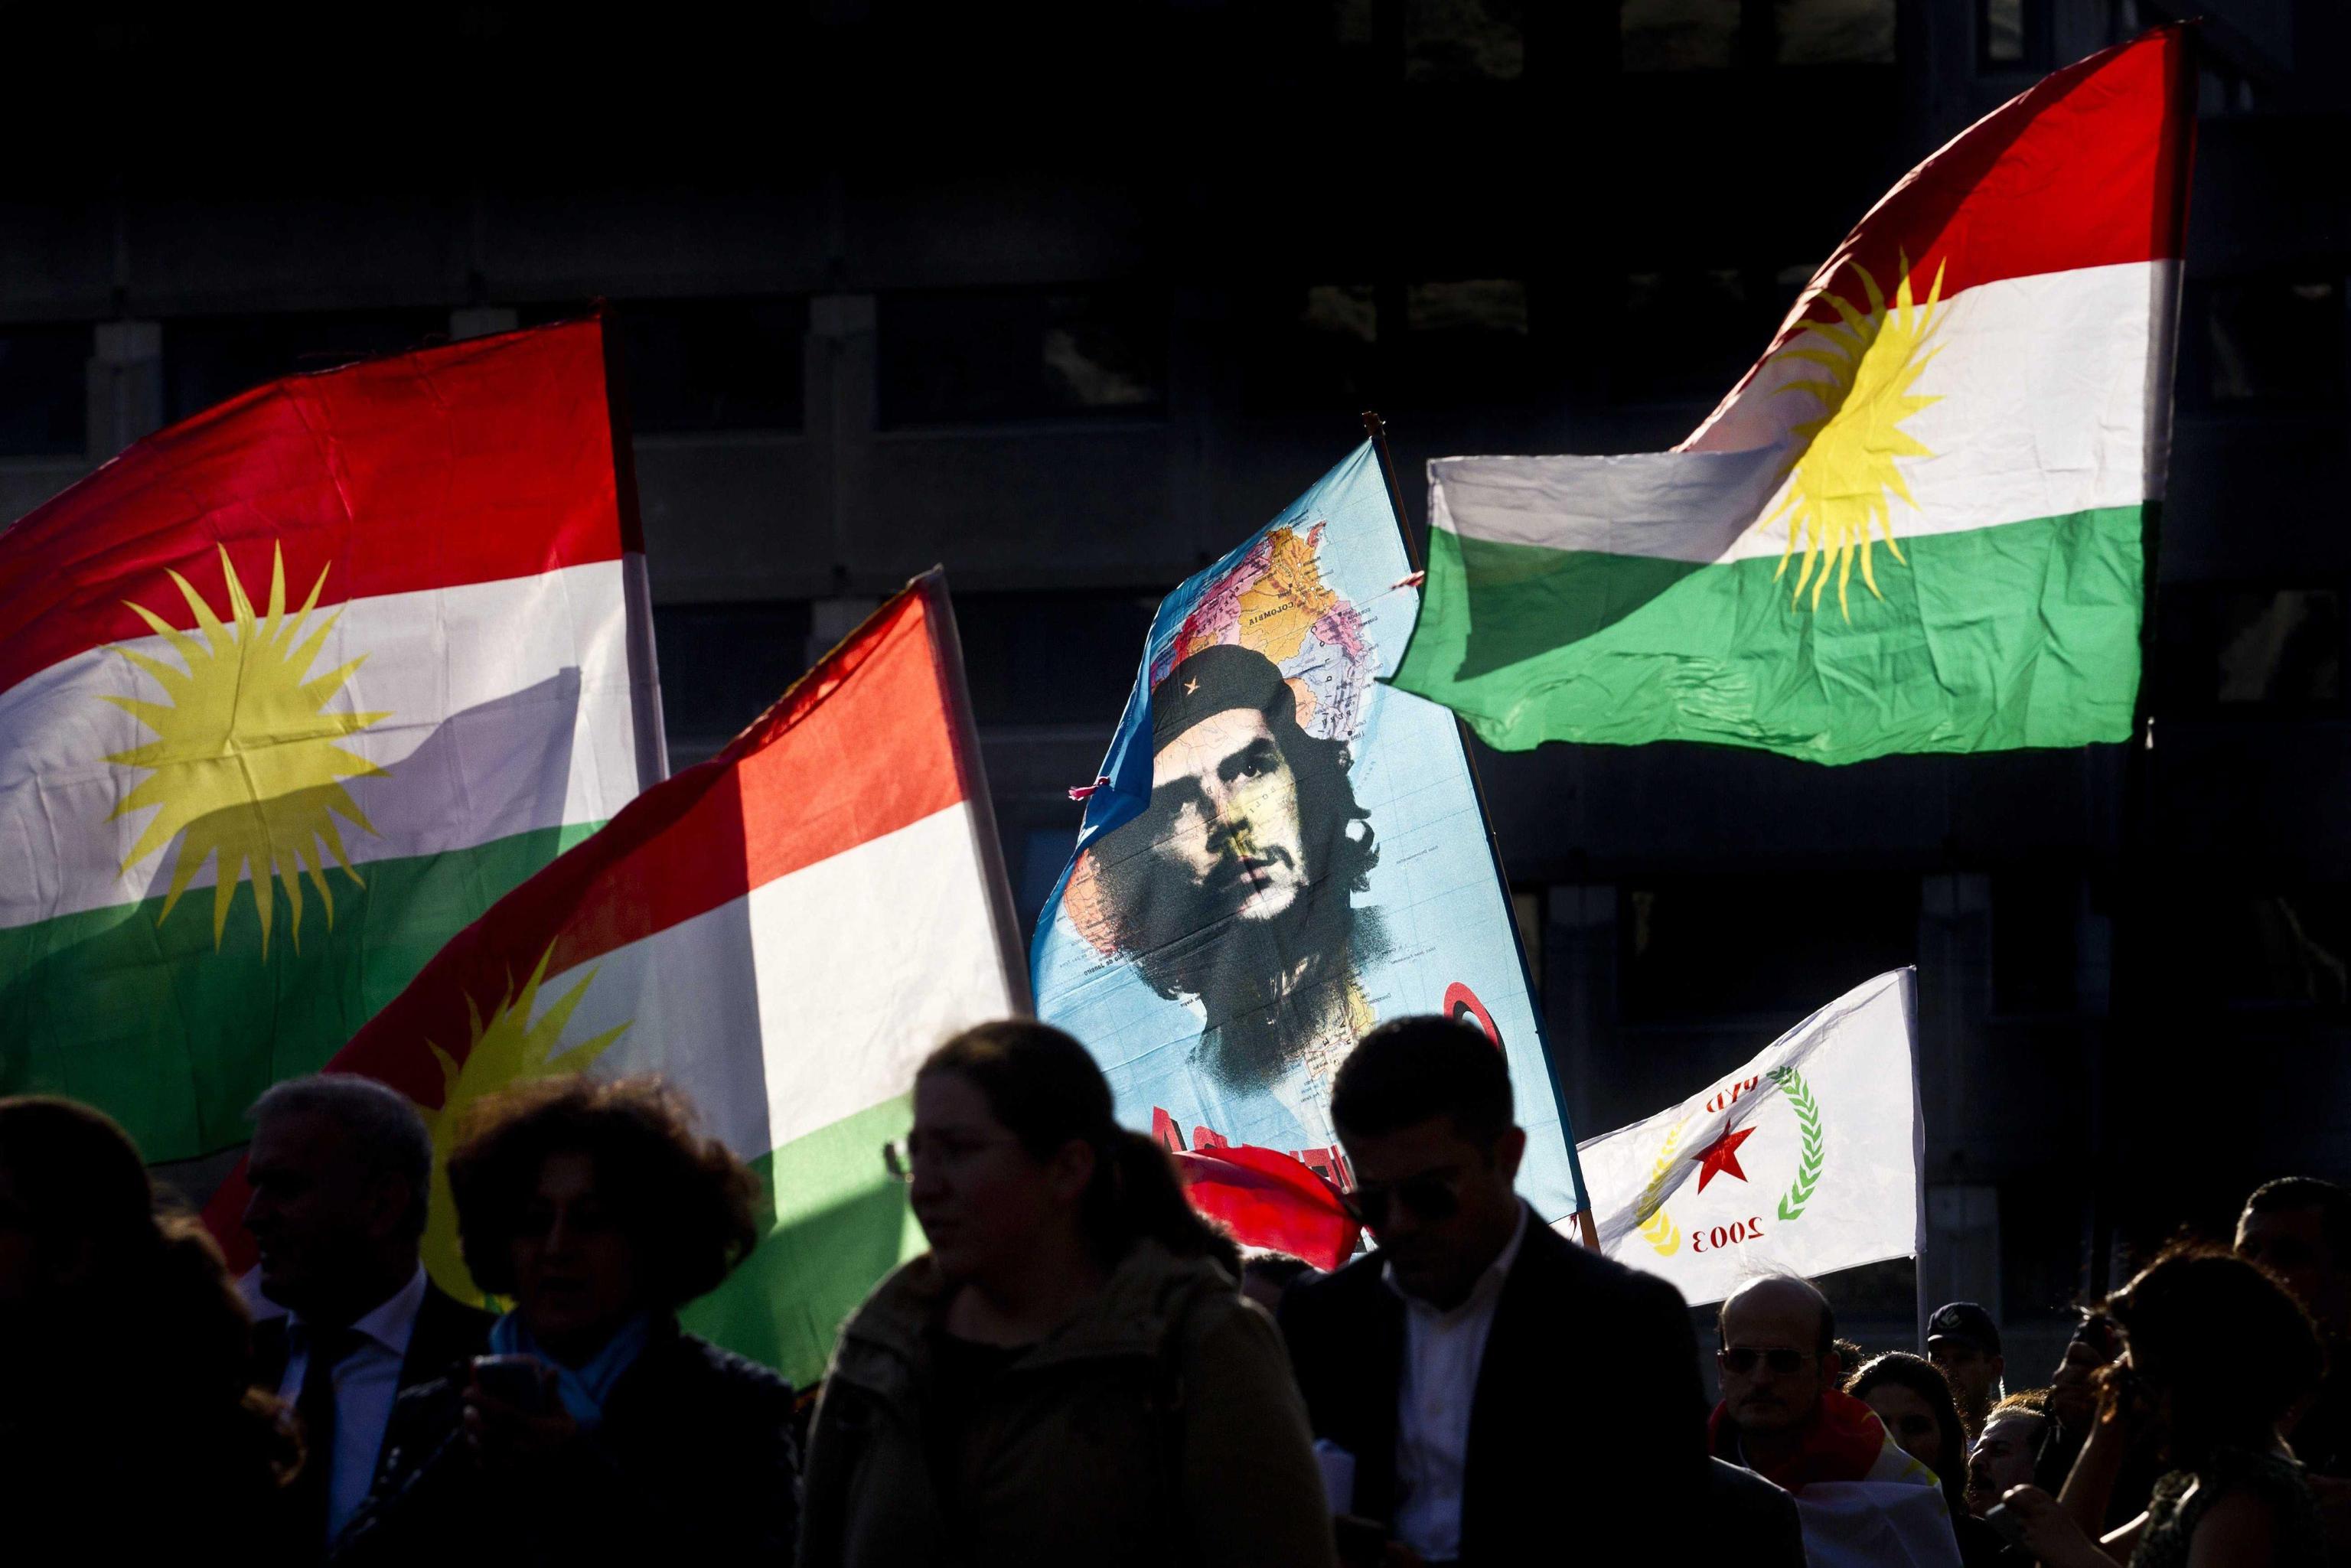 epa04472588 Kurdish protestors carry a flag with the portrait of Che Guevara during a demonstration calling for support for the Syrian Kurdish town of Ain al-Arab, known as Kobane, currently besieged by the Islamic State (IS), in The Hague, The Netherlands 01 November 2014. Fighting between the Islamic terrorists IS and Kurdish forces in the town of Ain al-Arab in the Syrian Turkey border, where forced than 200,000 people to flee to Turkey.  EPA/EVERT-JAN DANIELS